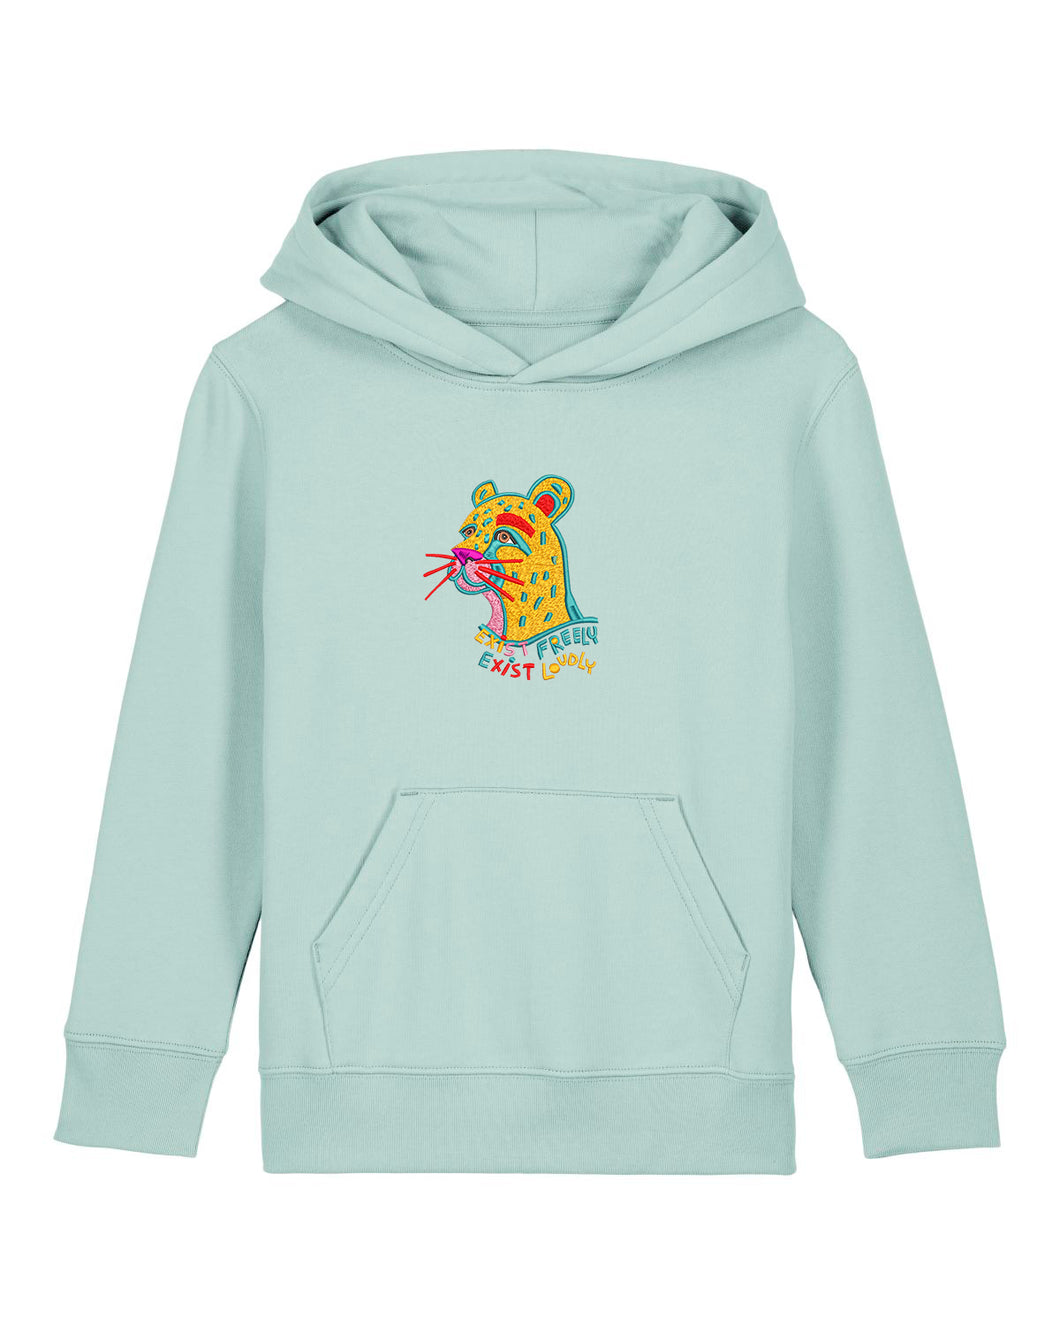 Cheetah 🐆  EXIST FREELY! EXIST LOUDLY! - Embroidered UNISEX KIDS hoodie